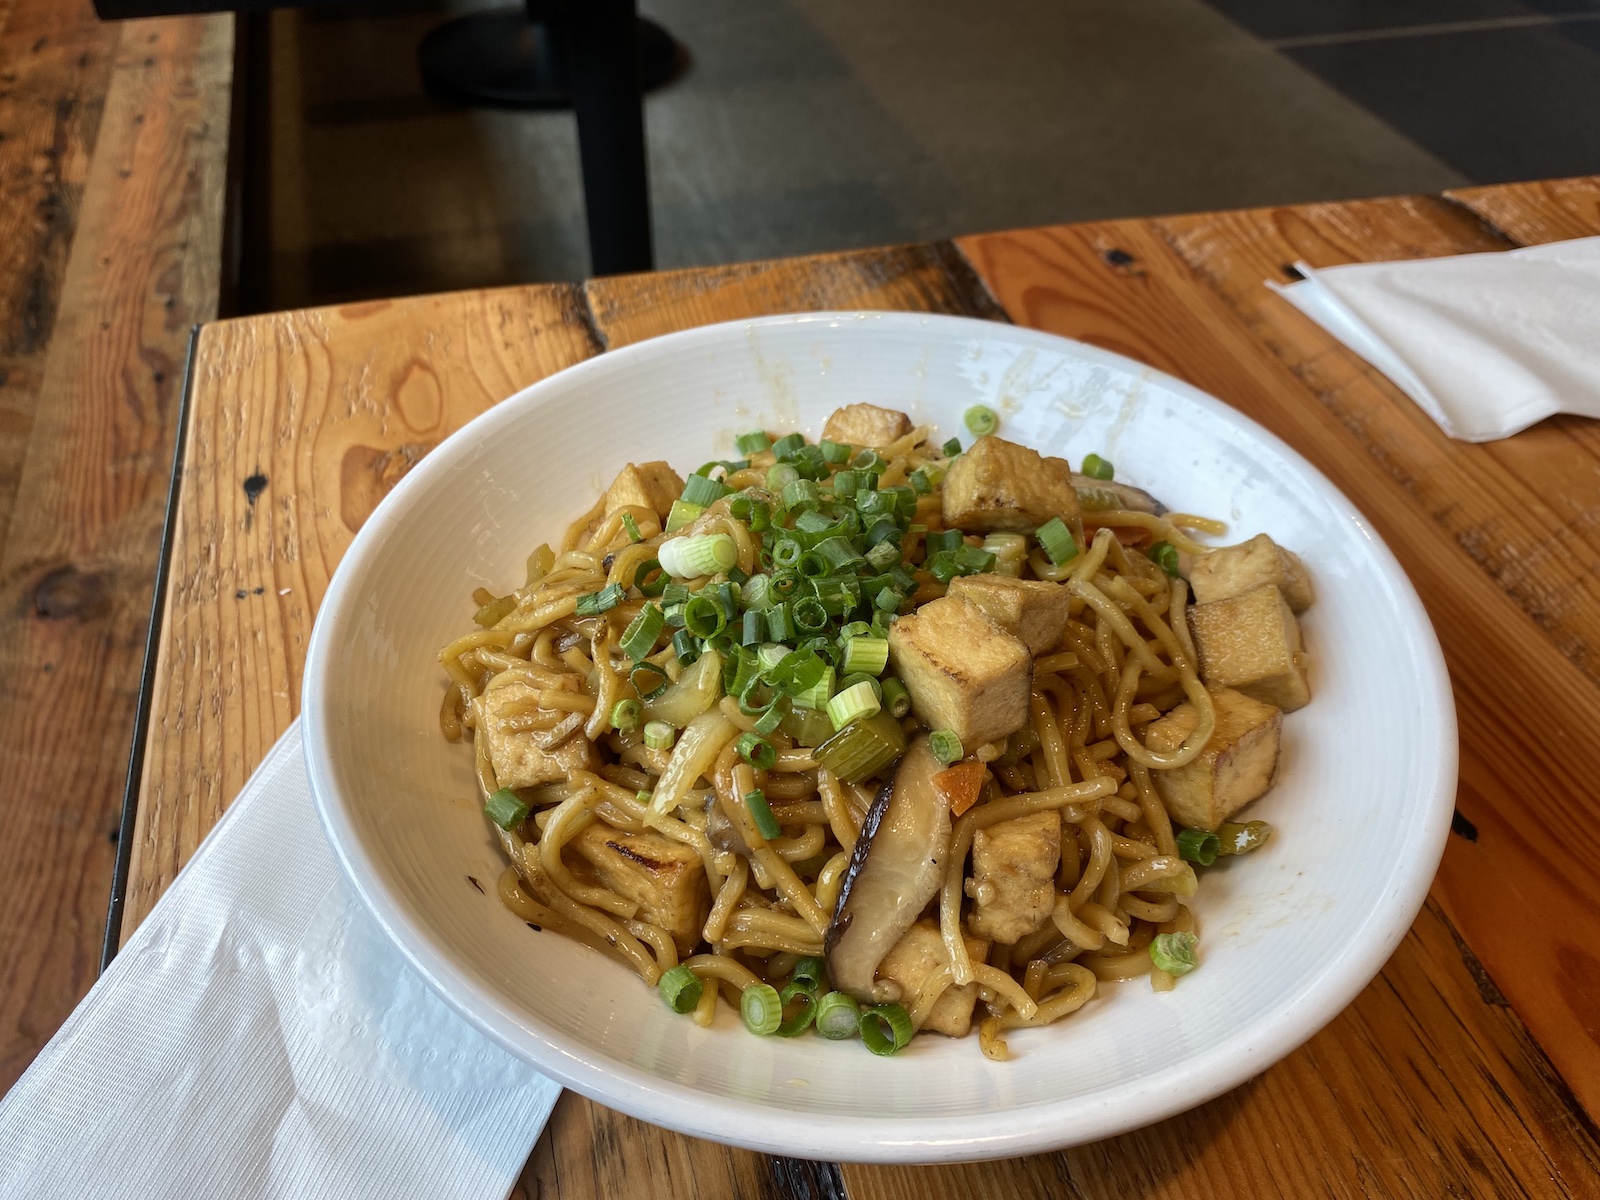 A plate of stir fry noodles with tofu sitting on a wooden table with napkins